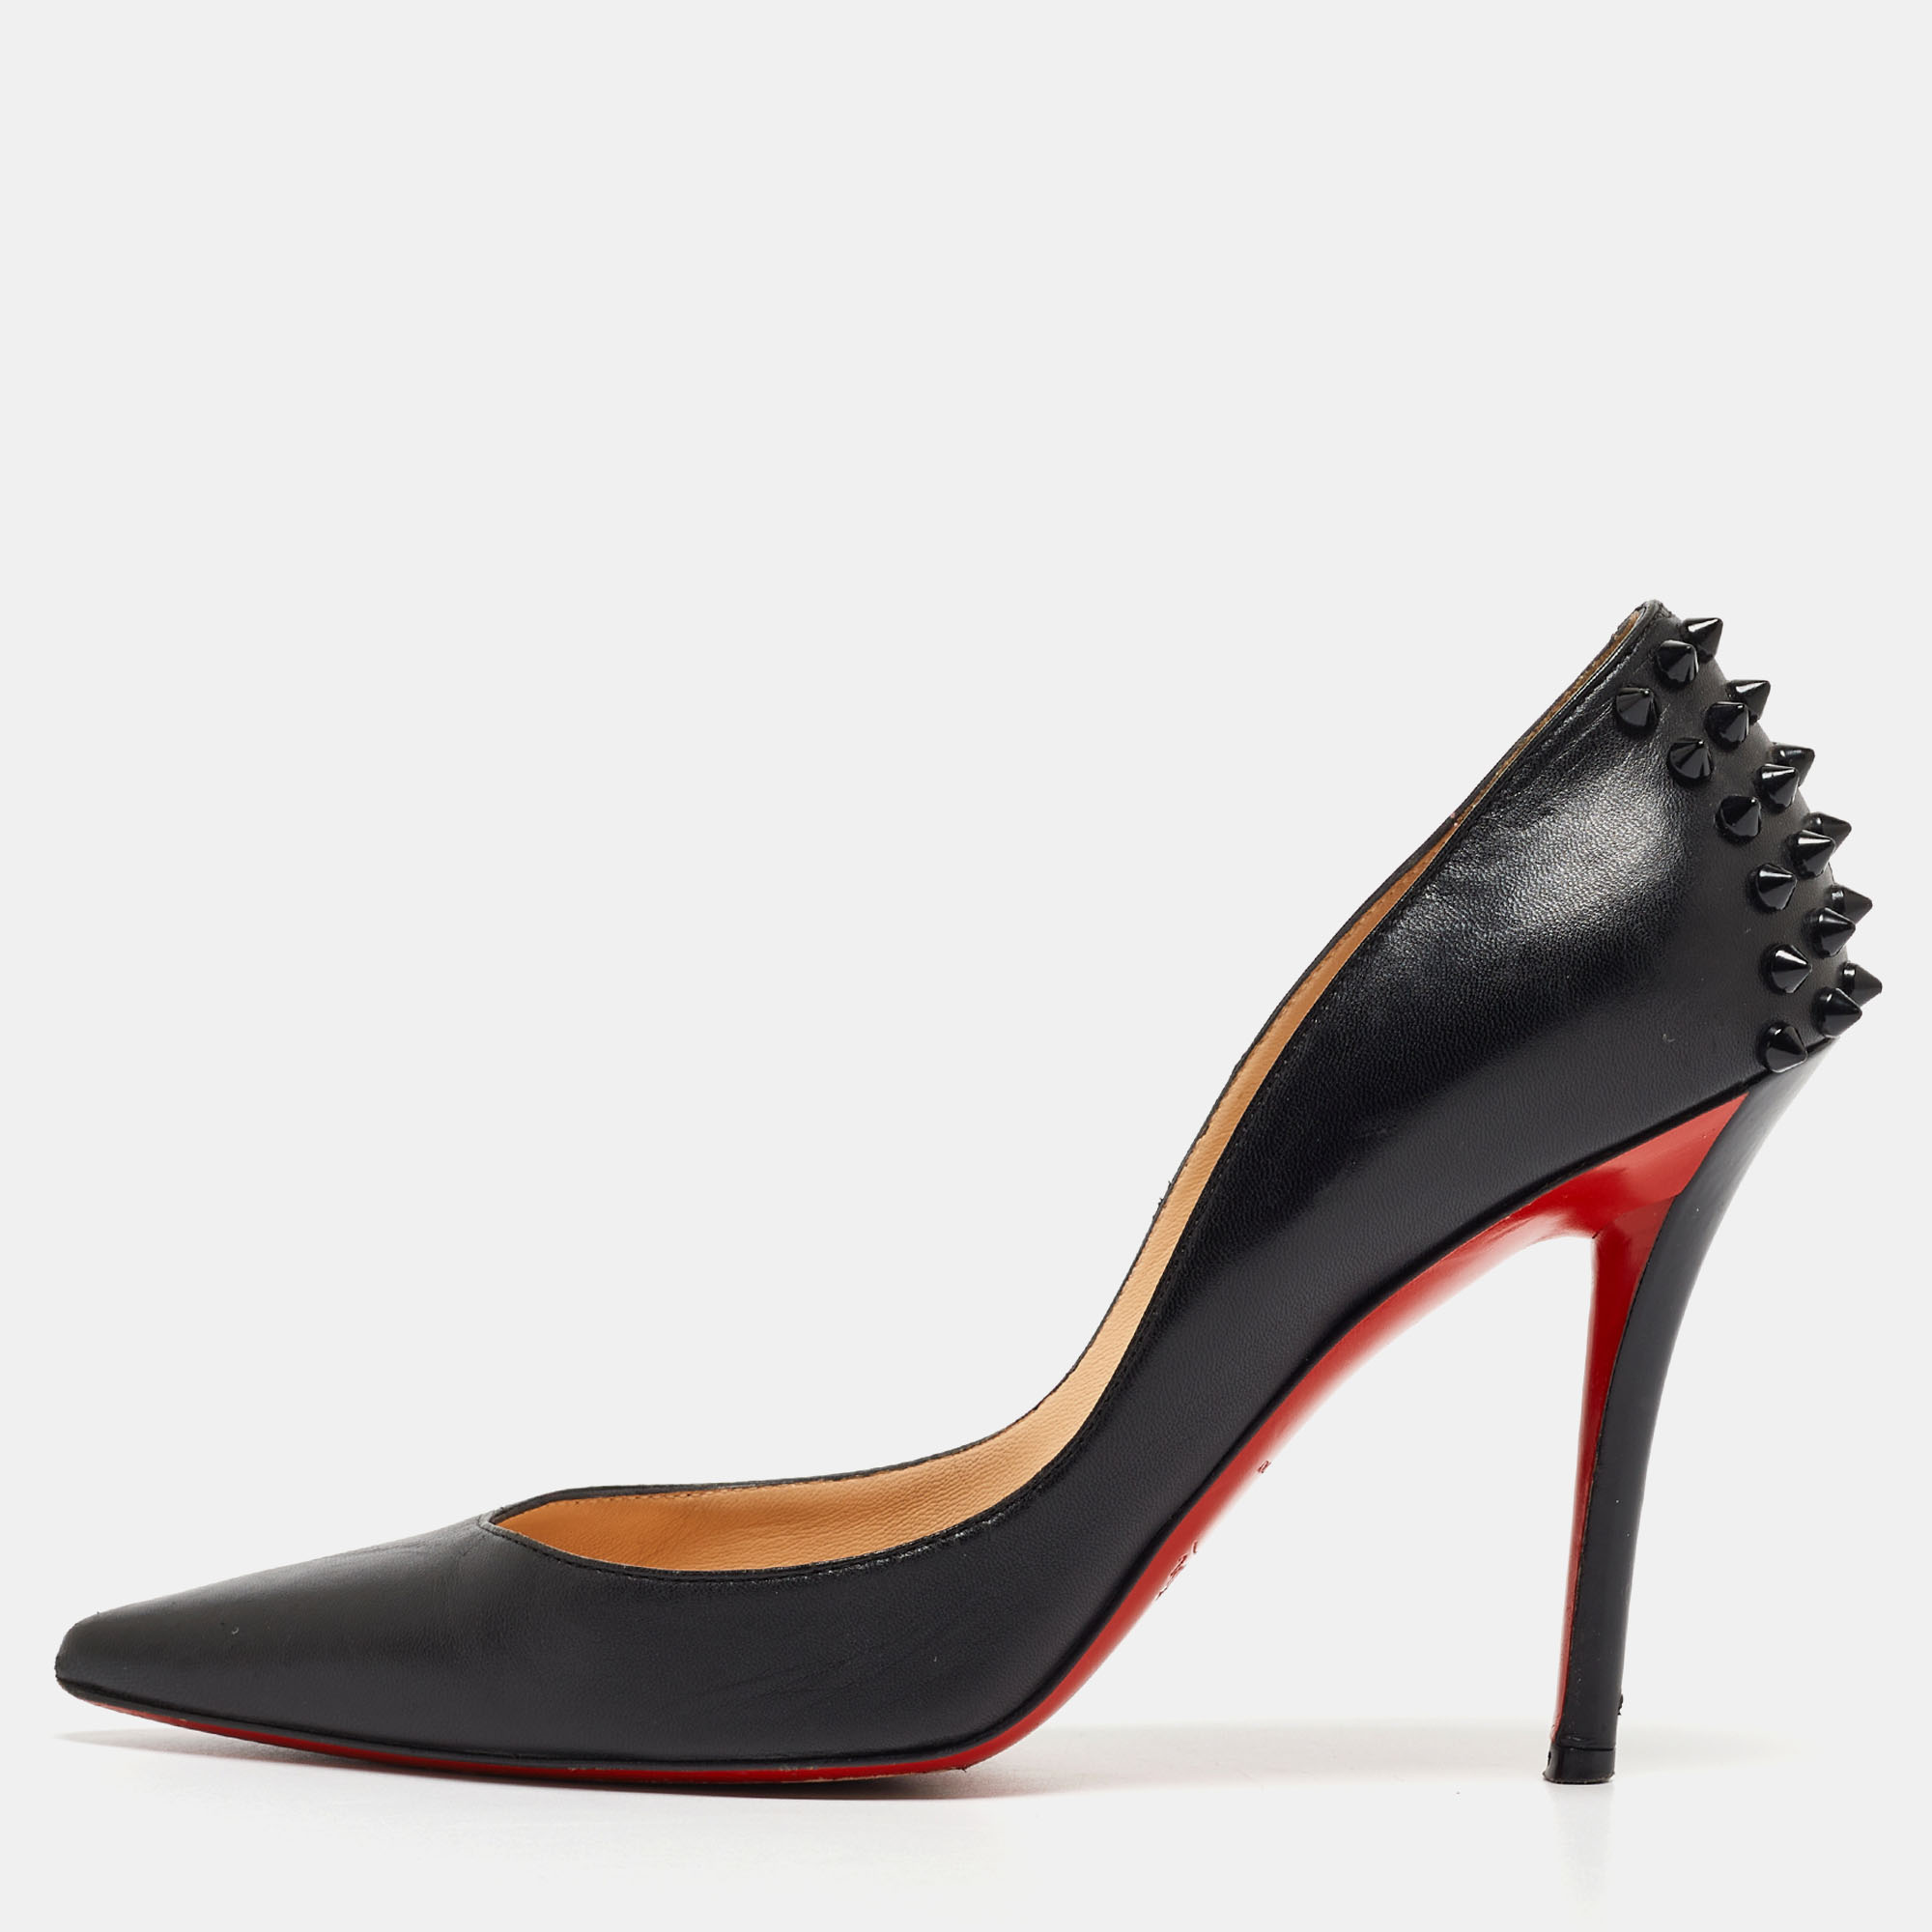 Pre-owned Christian Louboutin Black Leather Zappa Pumps Size 38